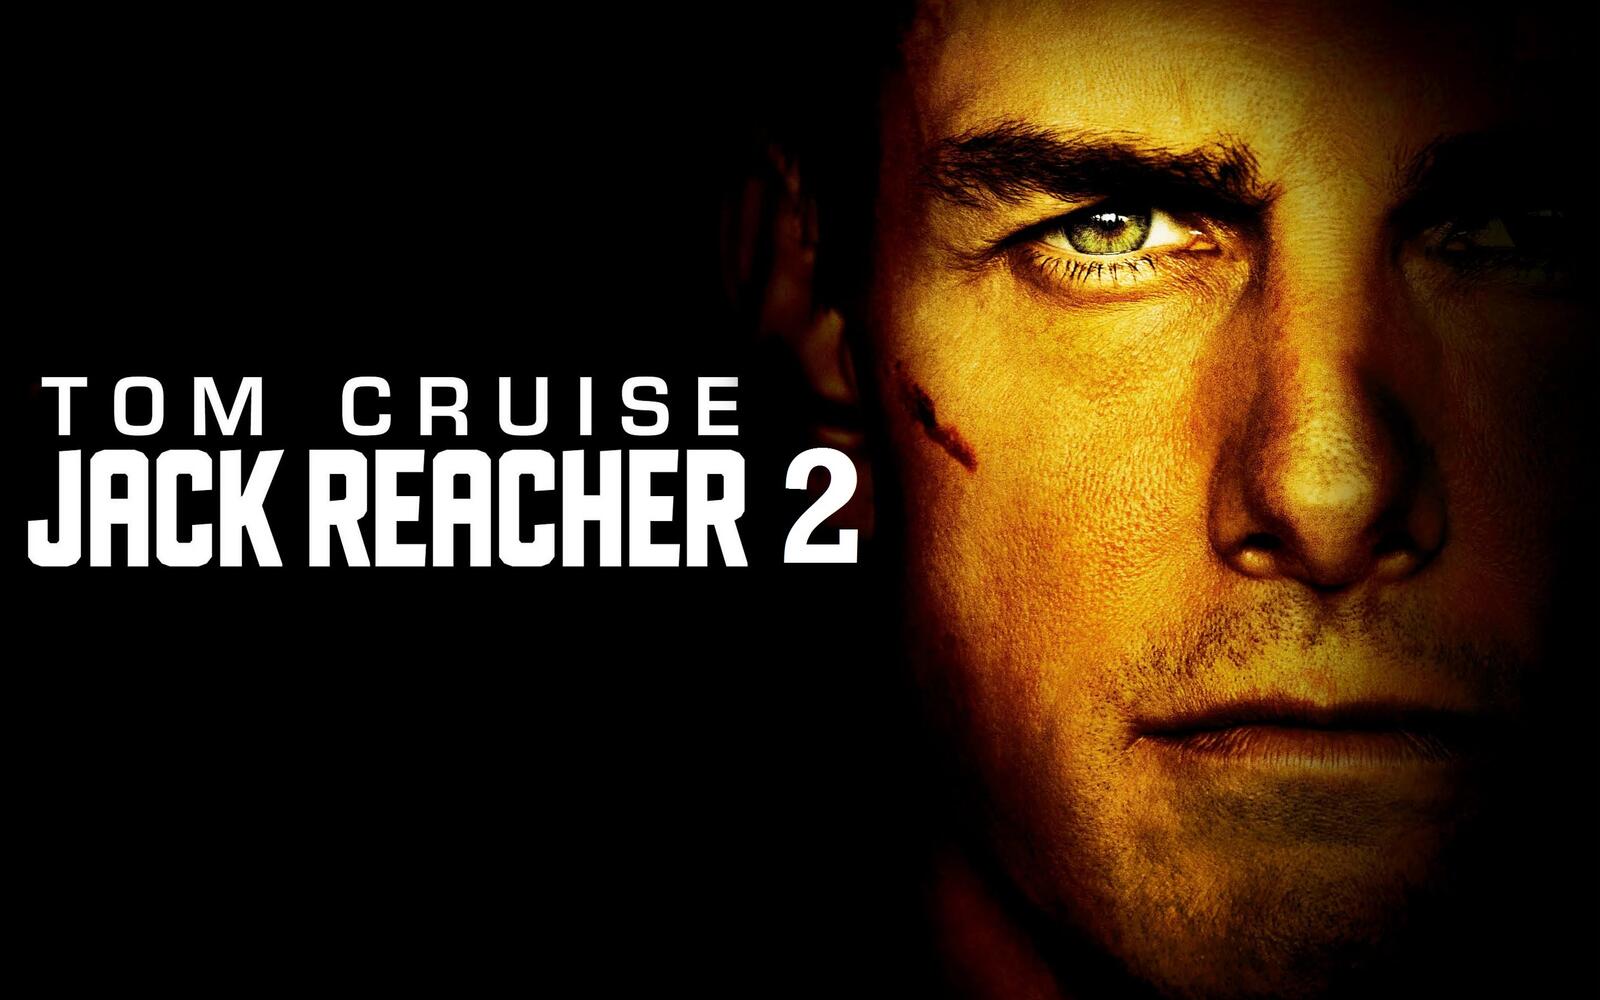 Wallpapers Tom Cruise movies jack reacher 2 on the desktop